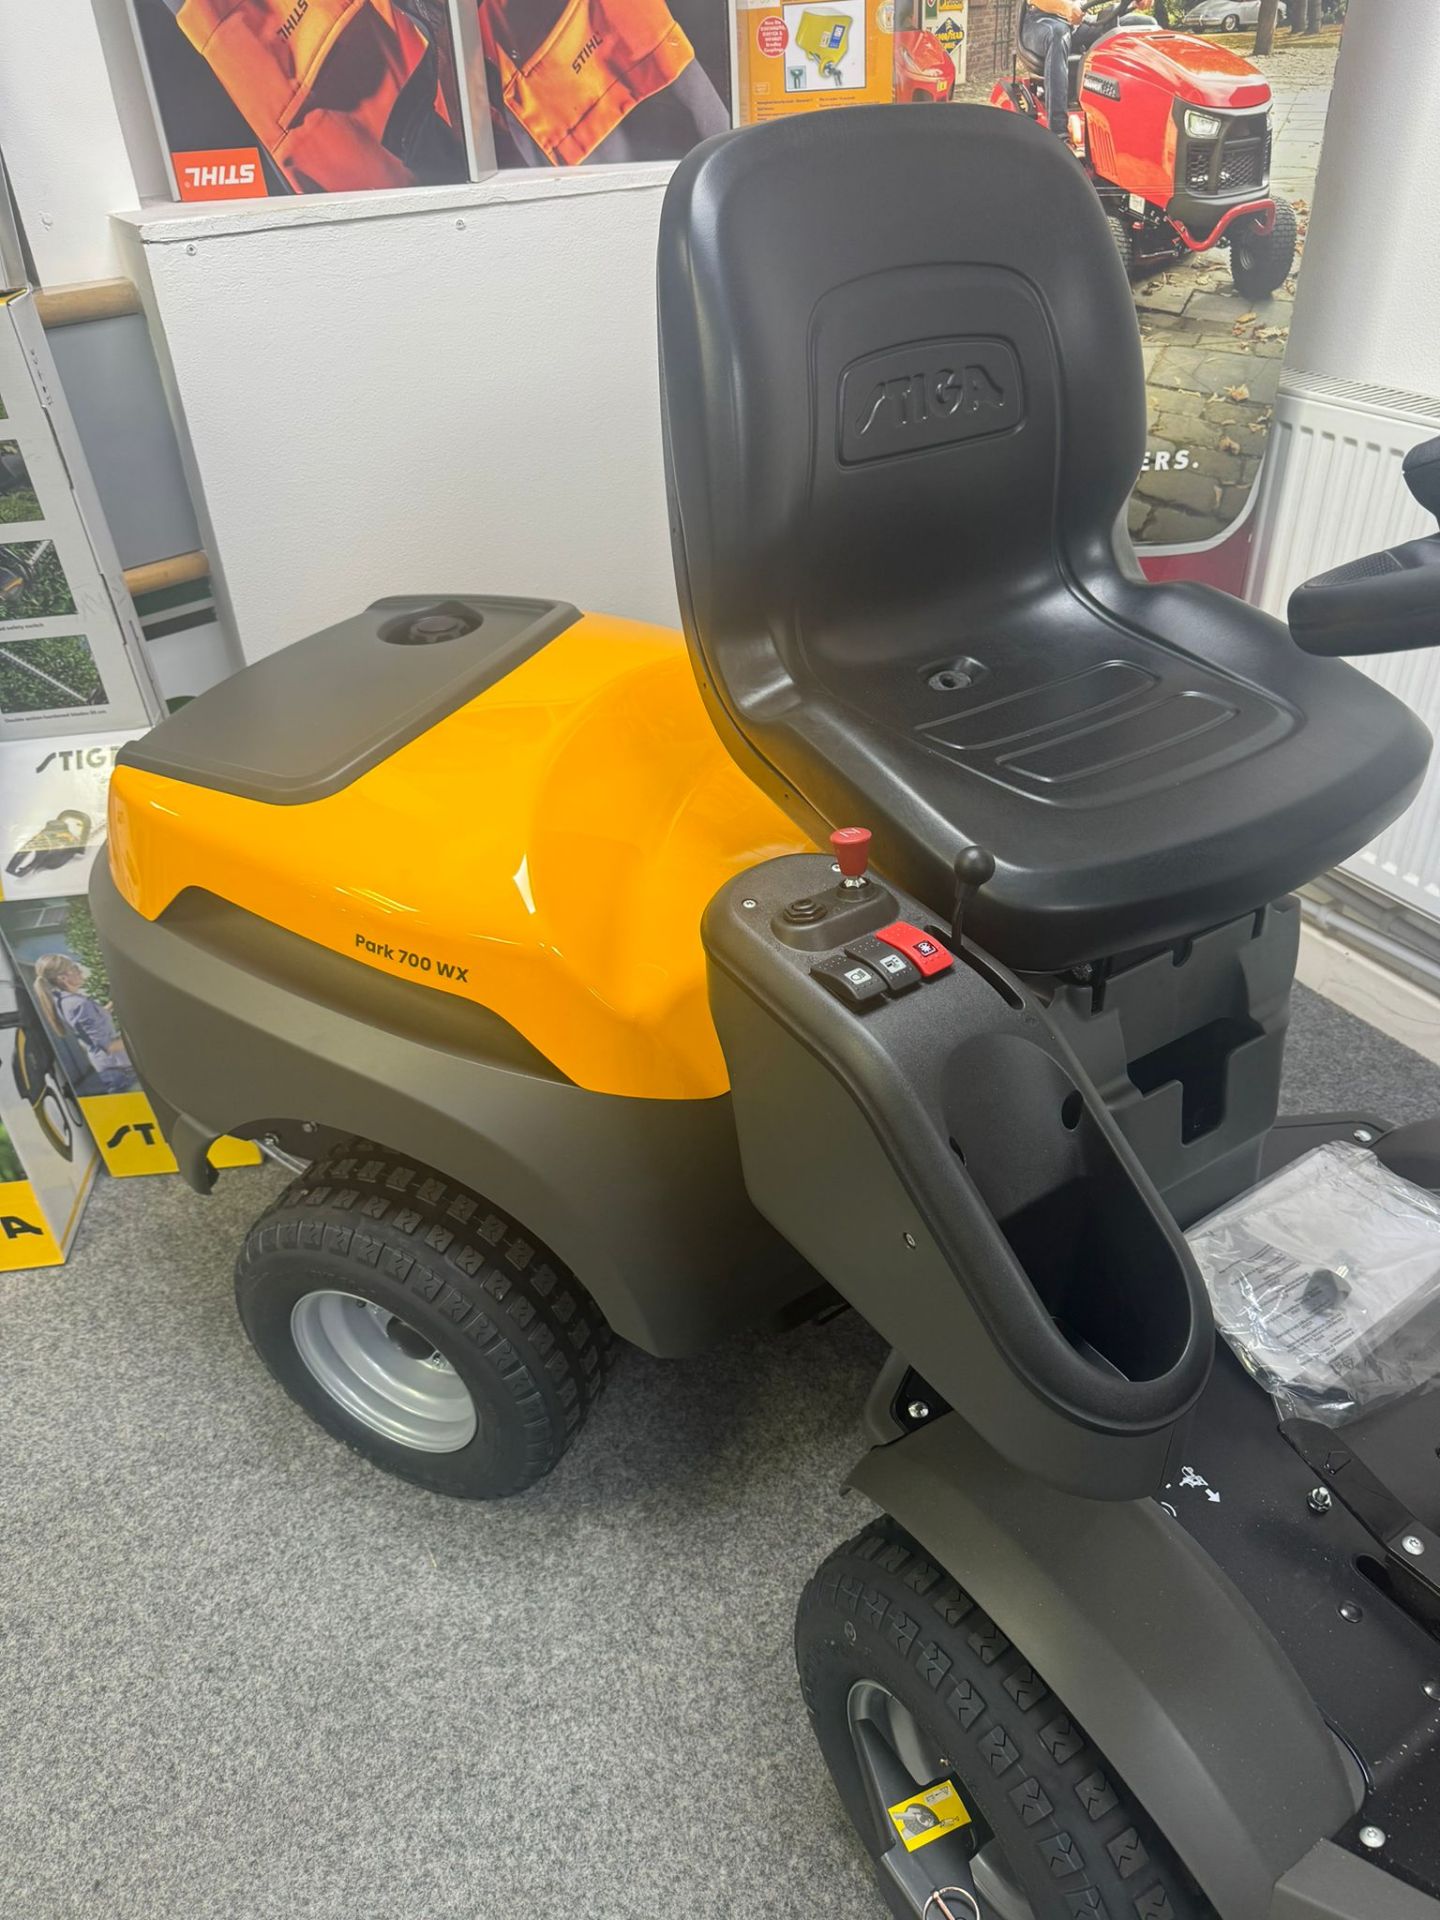 NEW/UNUSED STIGA PARK 700 WX RIDE ON LAWN MOWER 4X4 OUT FRONT *PLUS VAT* - Image 13 of 16